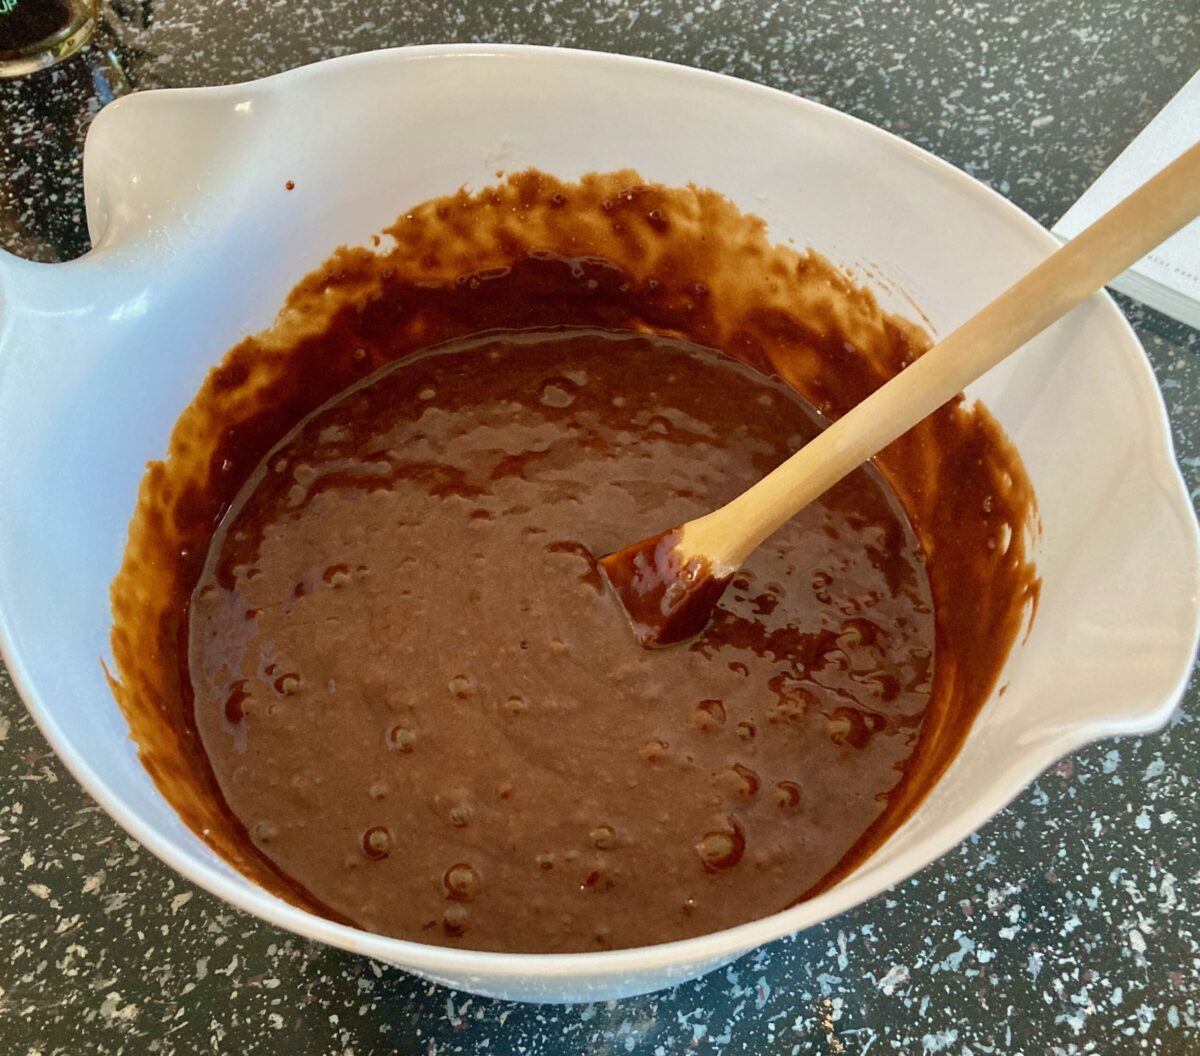 Mixing double ginger chocolate gingerbread batter in mixing bowl with a wooden spoon.